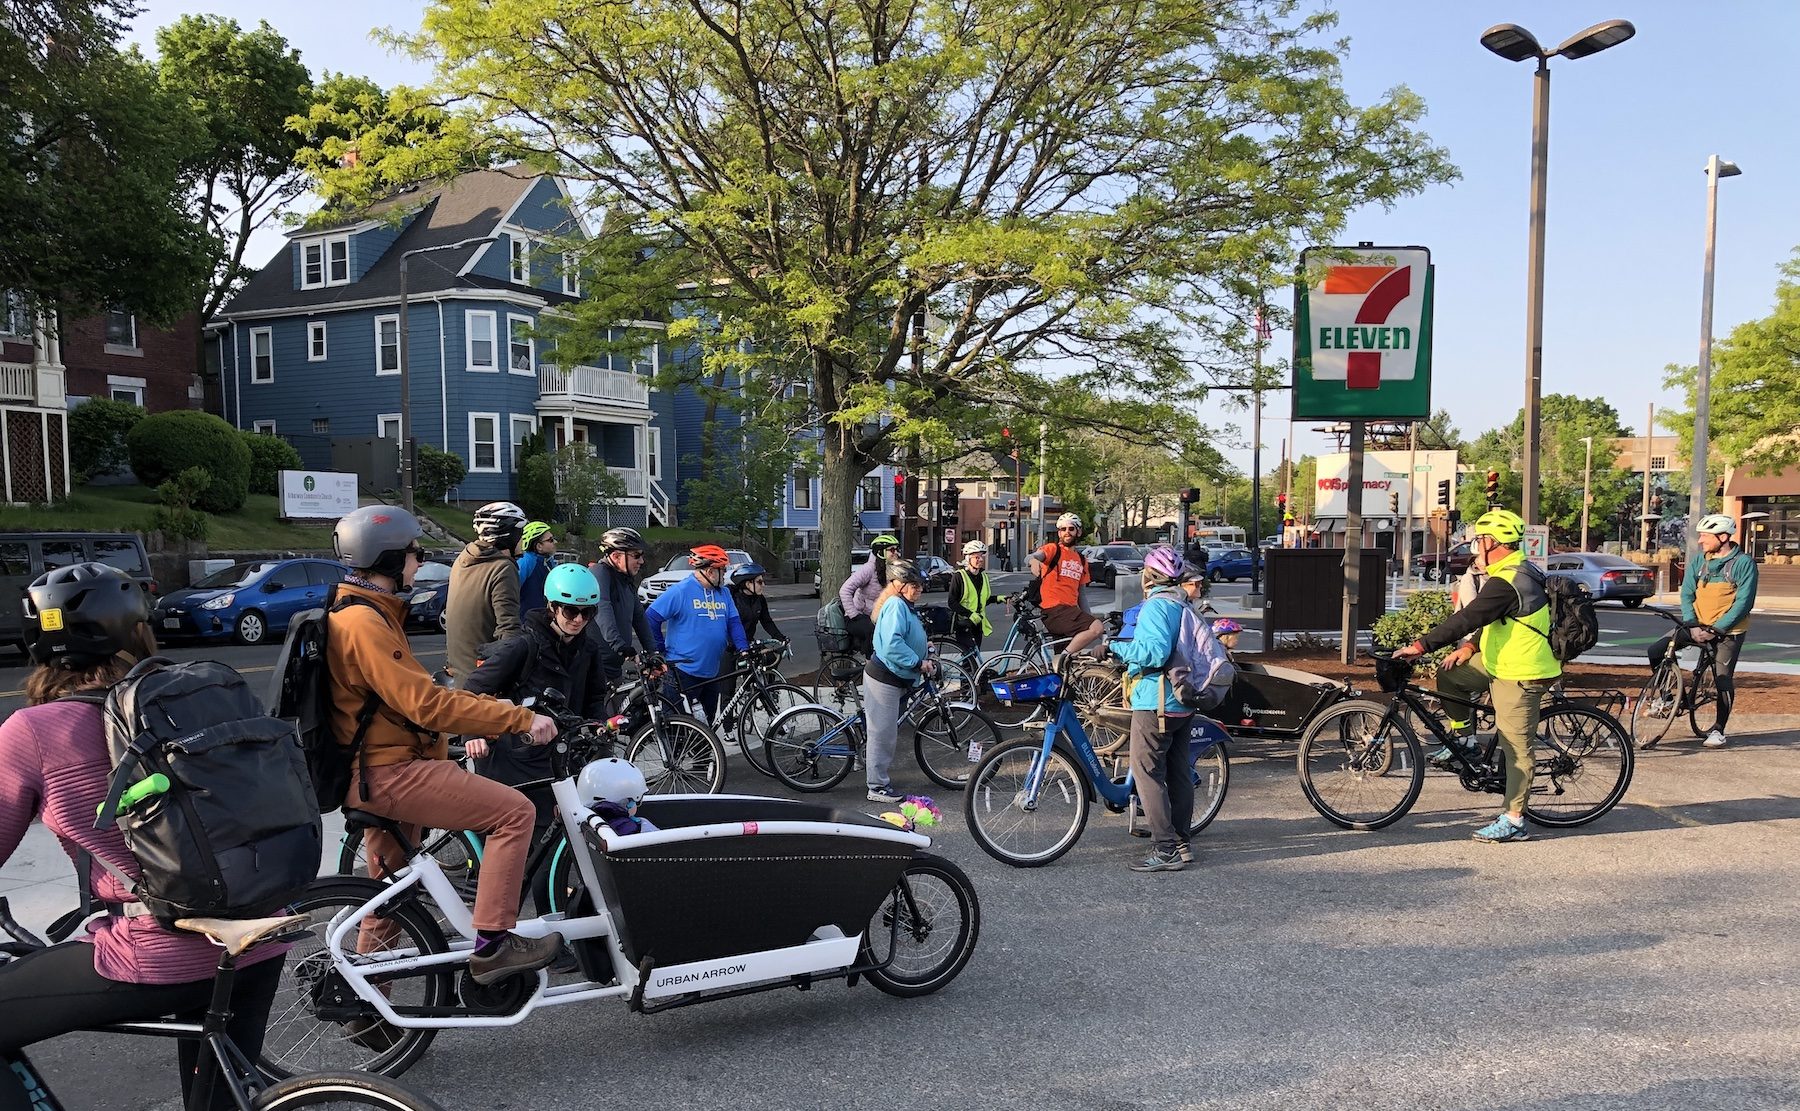 A crowd of bike riders gathers in a parking lot beneath a 7-11 sign. Several of the people are riding Dutch-style cargo bikes with large front-mounted boxes in which their children are sitting to come along for the ride.